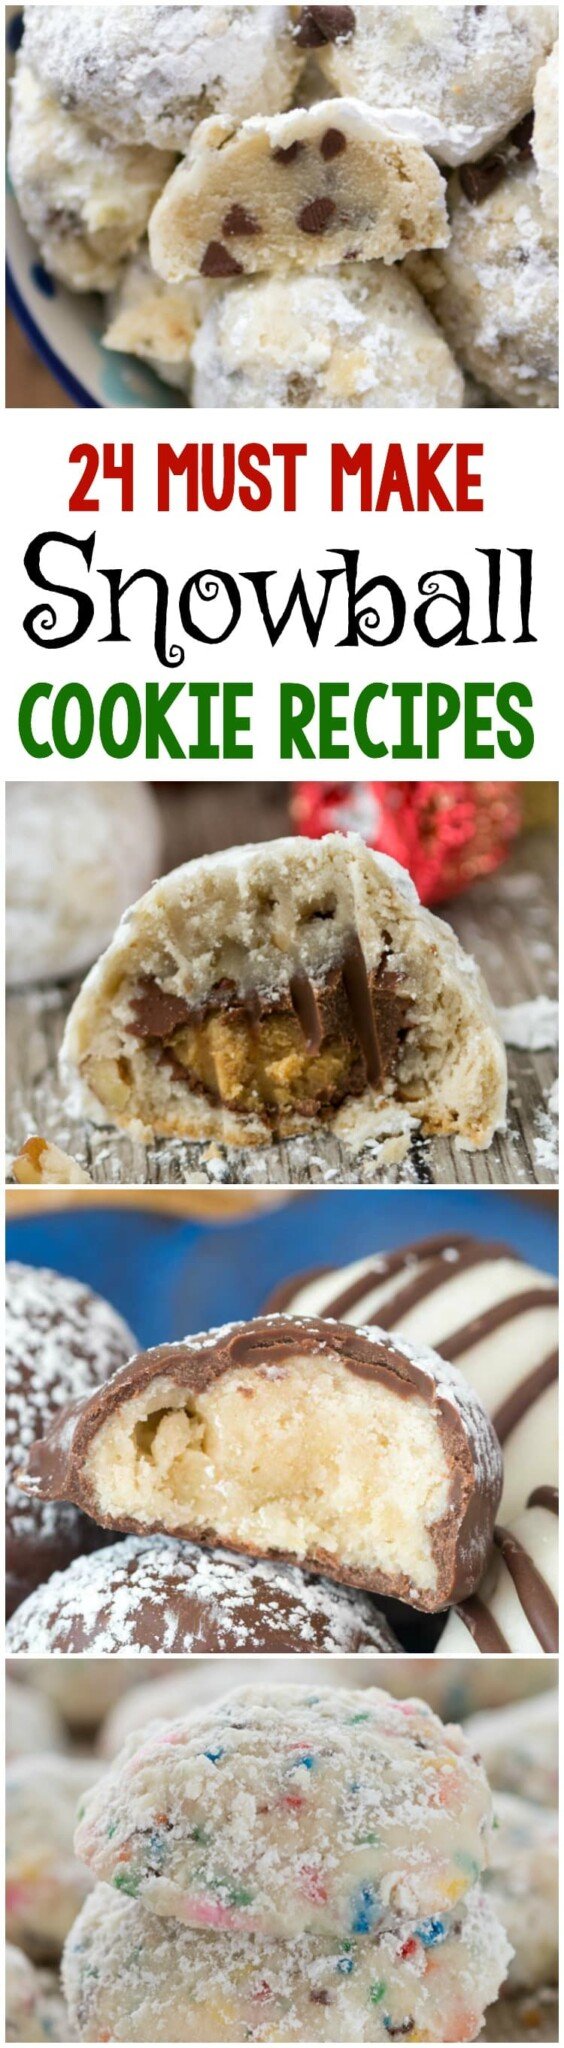 collage of 4 snowball cookie recipes